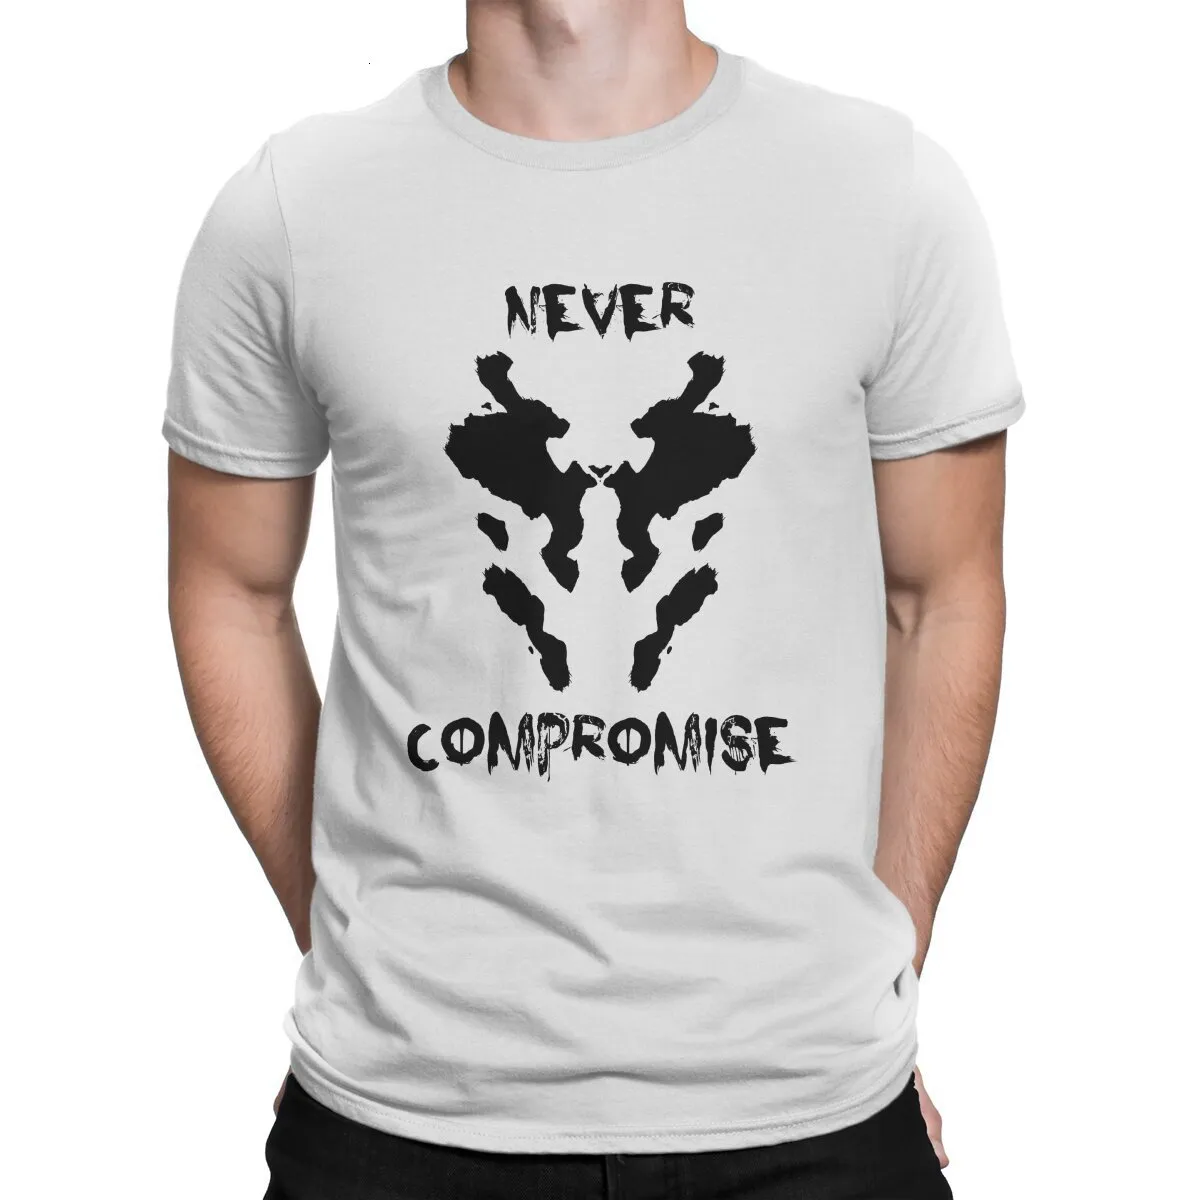 Mens TShirts TShirt Never Compromise Rorschach Novelty 100% Cotton Tees Short Sleeve Watchmen T Shirts Crew Neck Top 230321